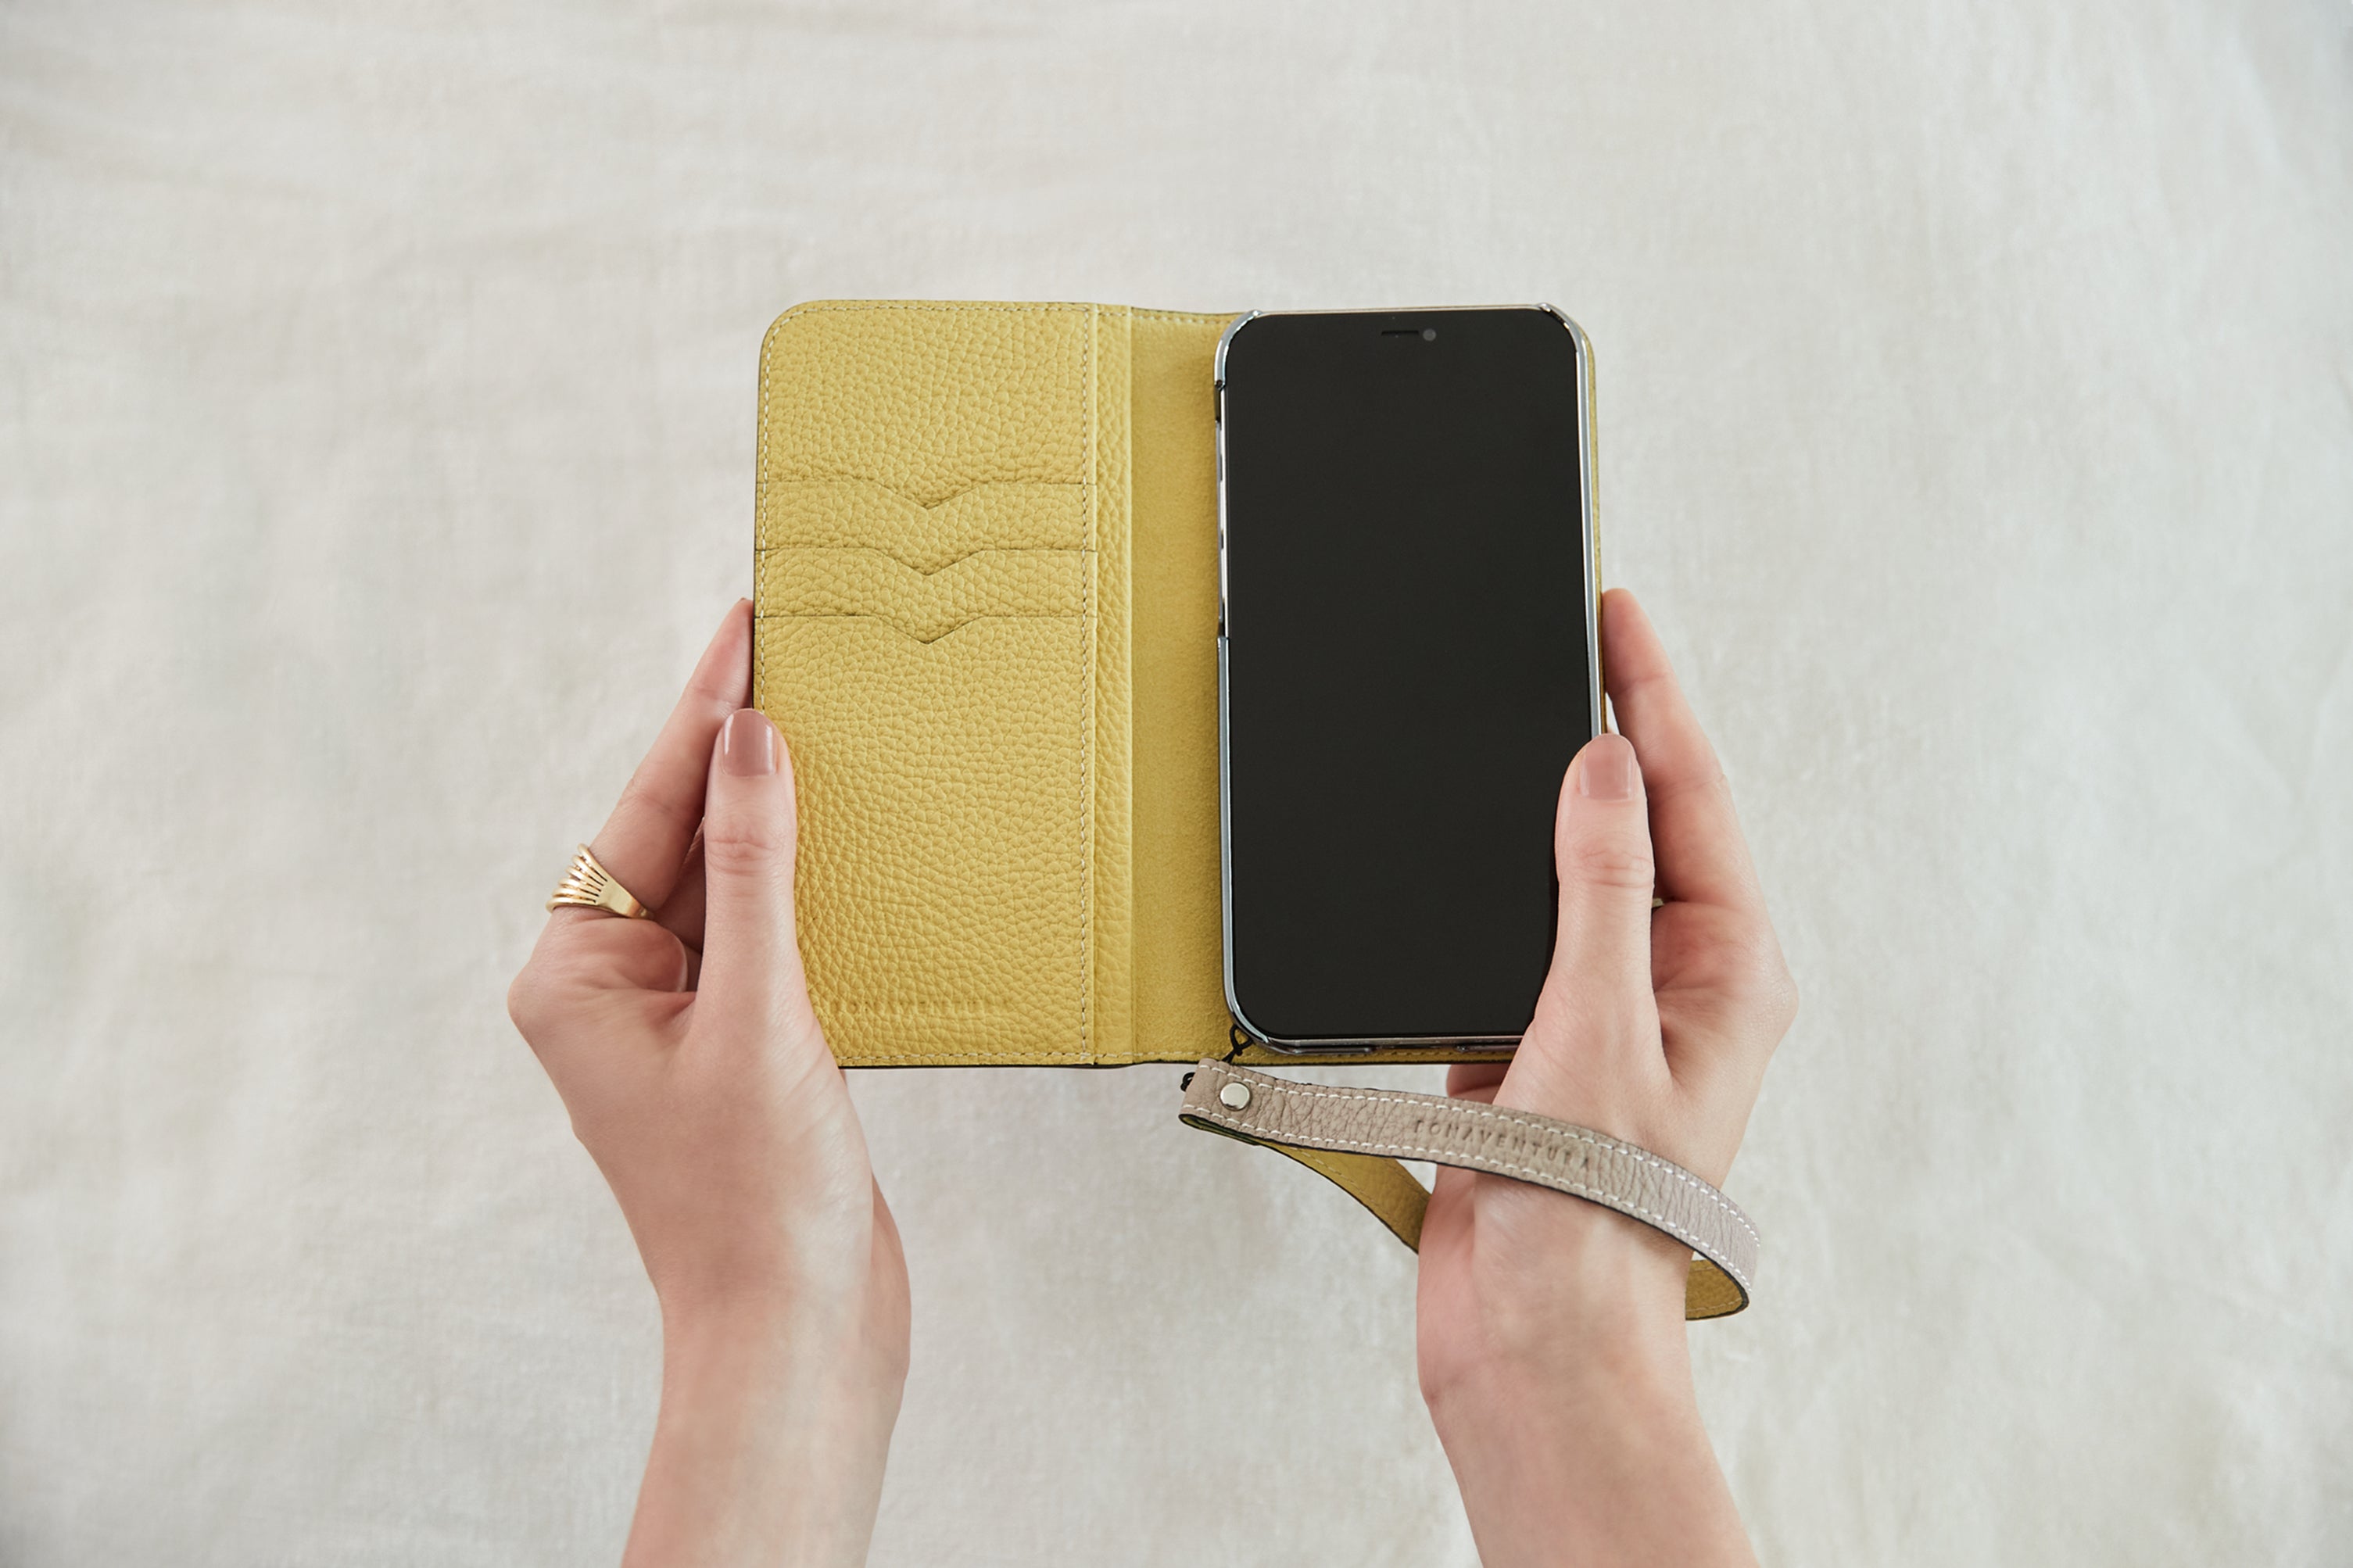 iPhone in a high-quality leather case from BONAVENTURA.